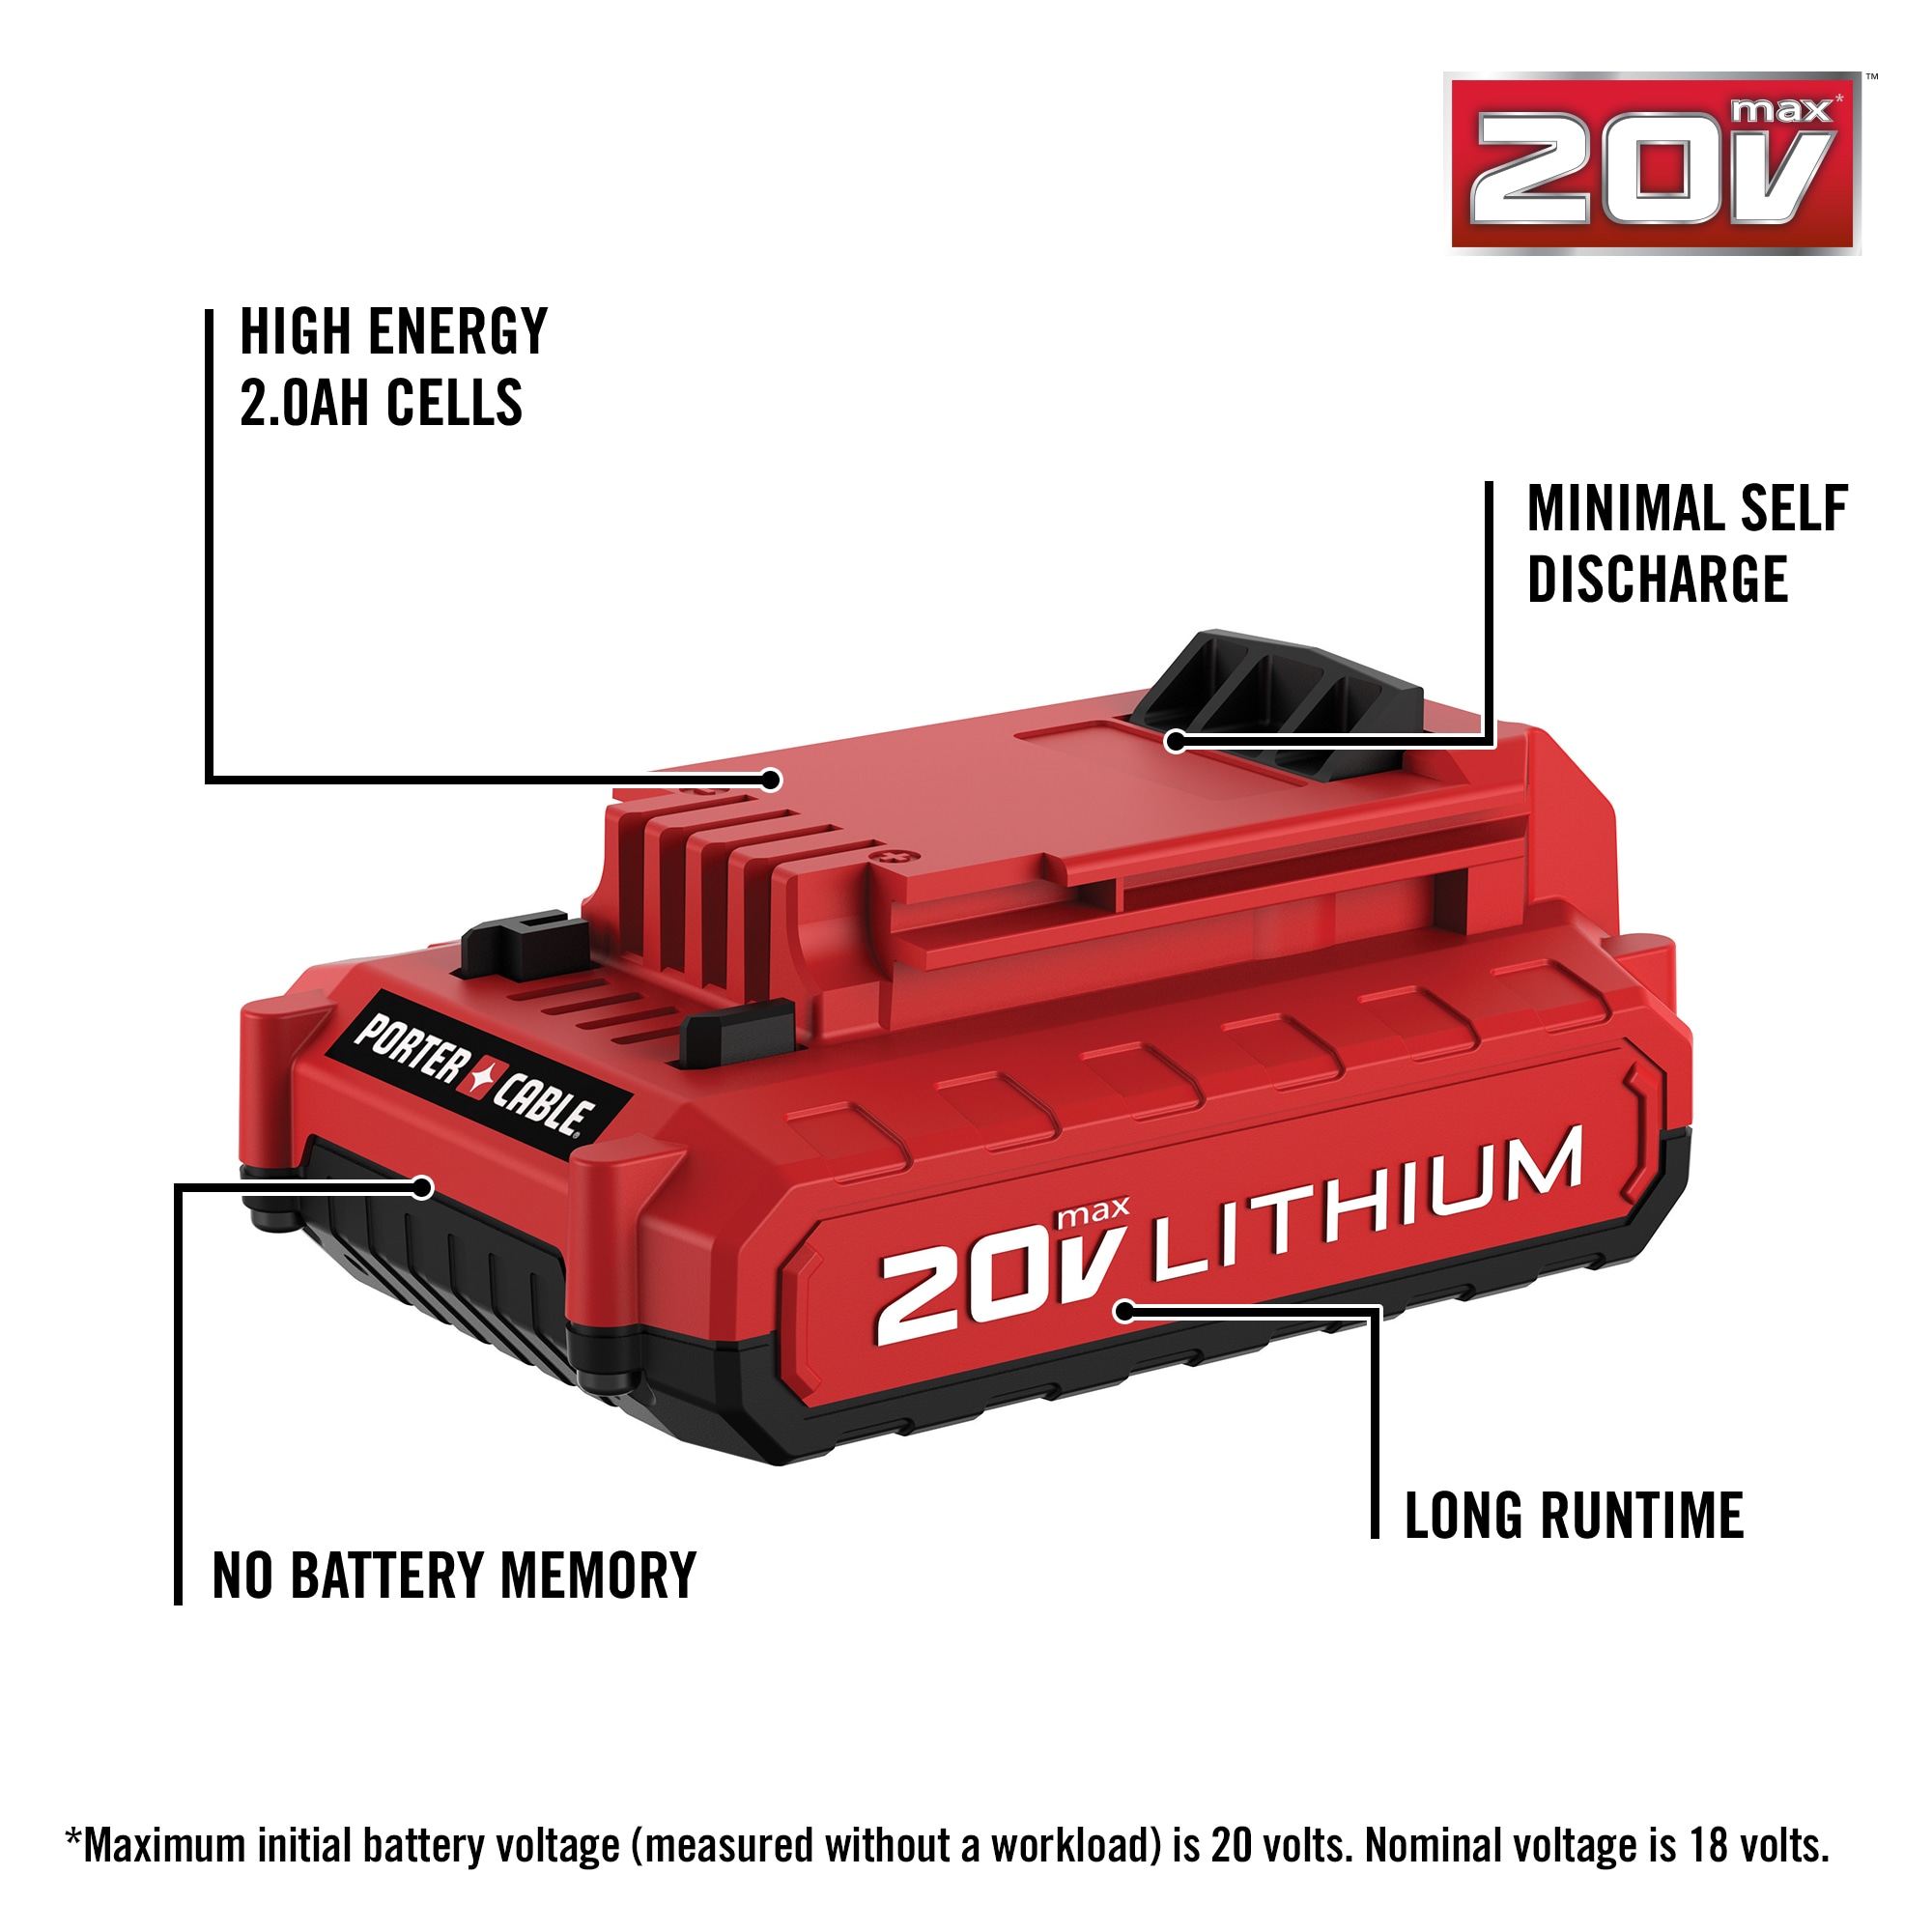 Porter Cable 20V and Black & Decker 20V Batteries are Interchangeable! 